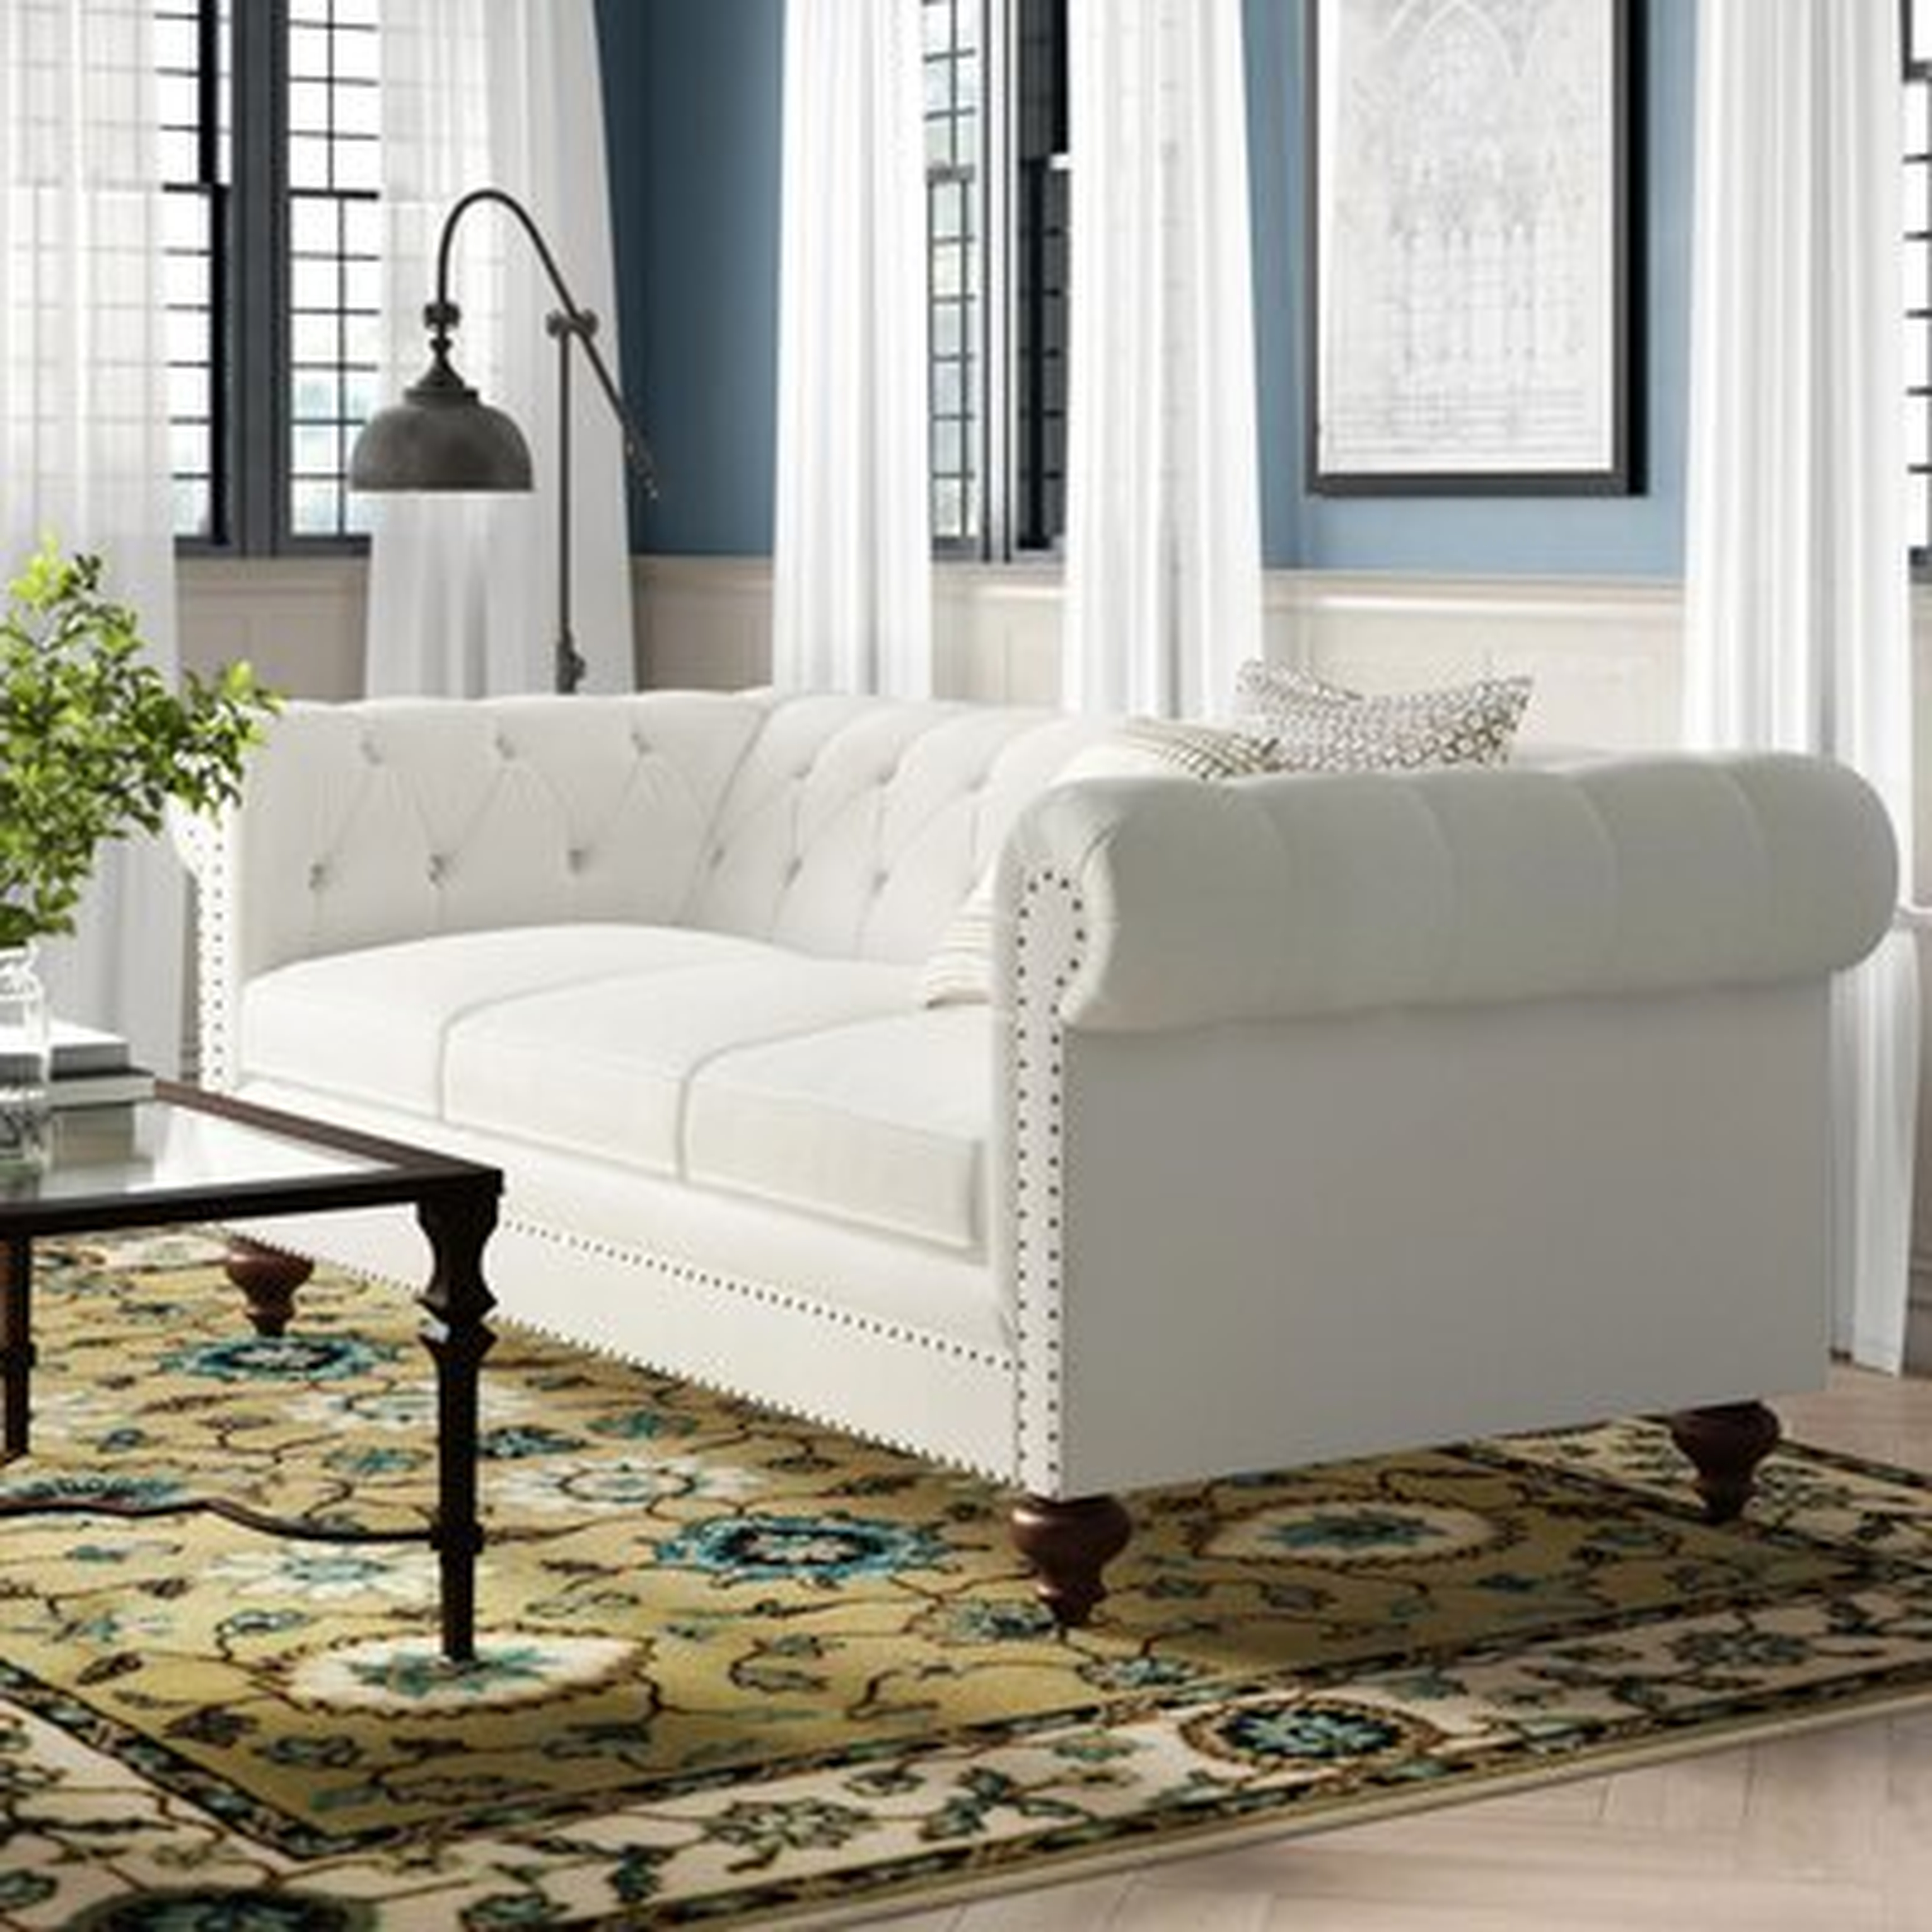 Pepperell Chesterfield 95" Rolled Arm Sofa - Birch Lane